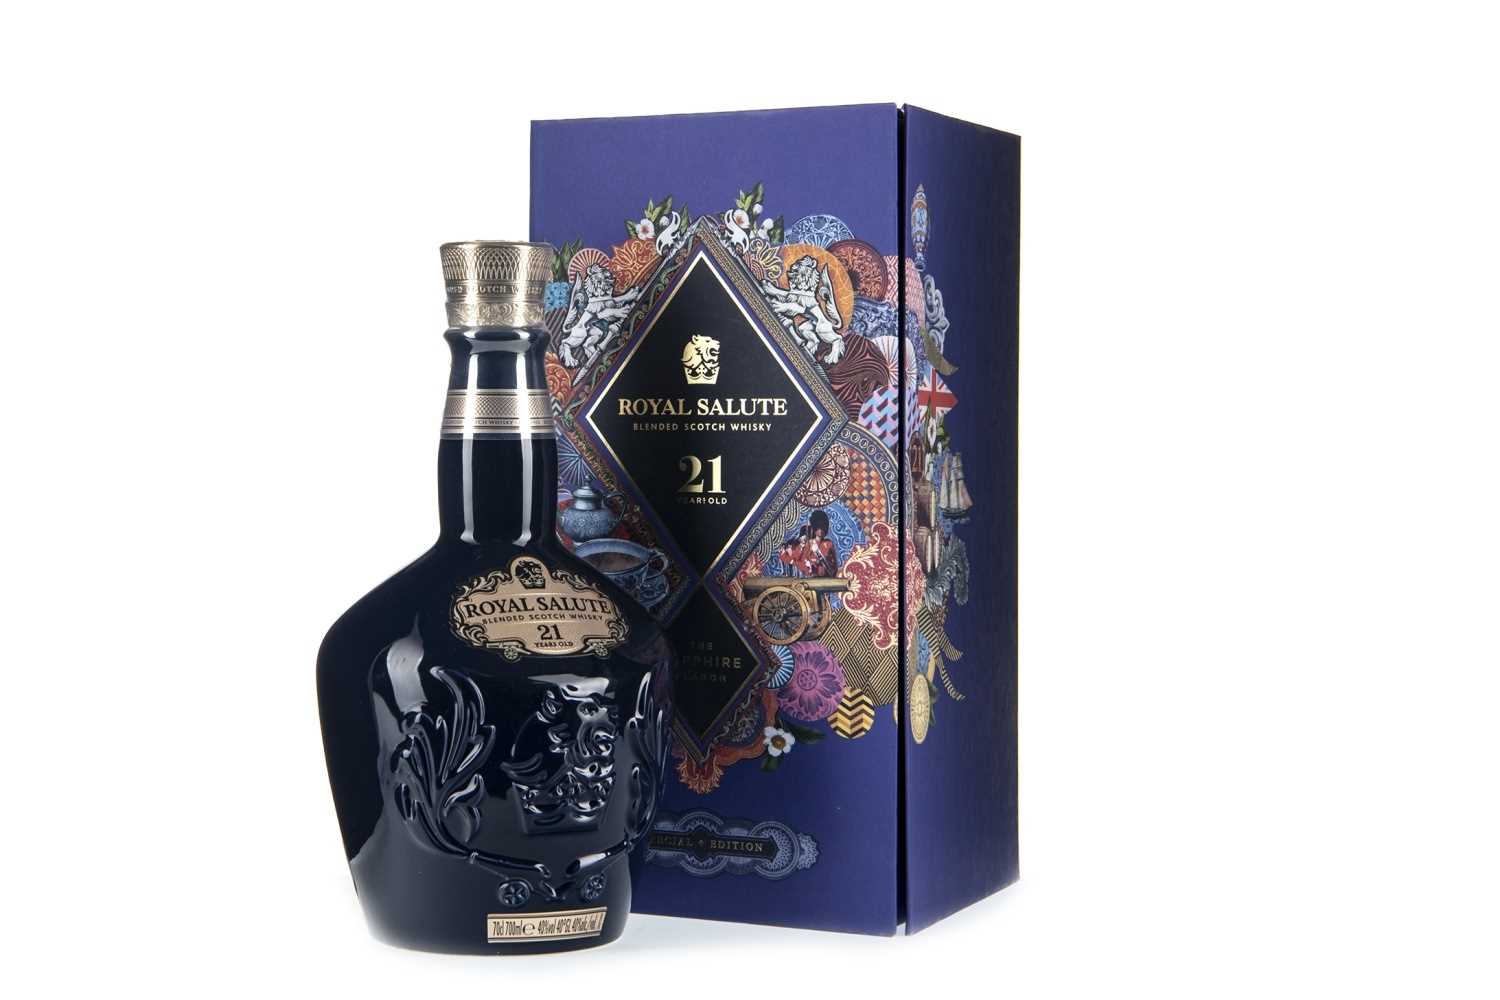 Lot 407 - CHIVAS REGAL ROYAL SALUTE SAPPHIRE FLAGON 21 YEARS OLD SPECIAL EDITION